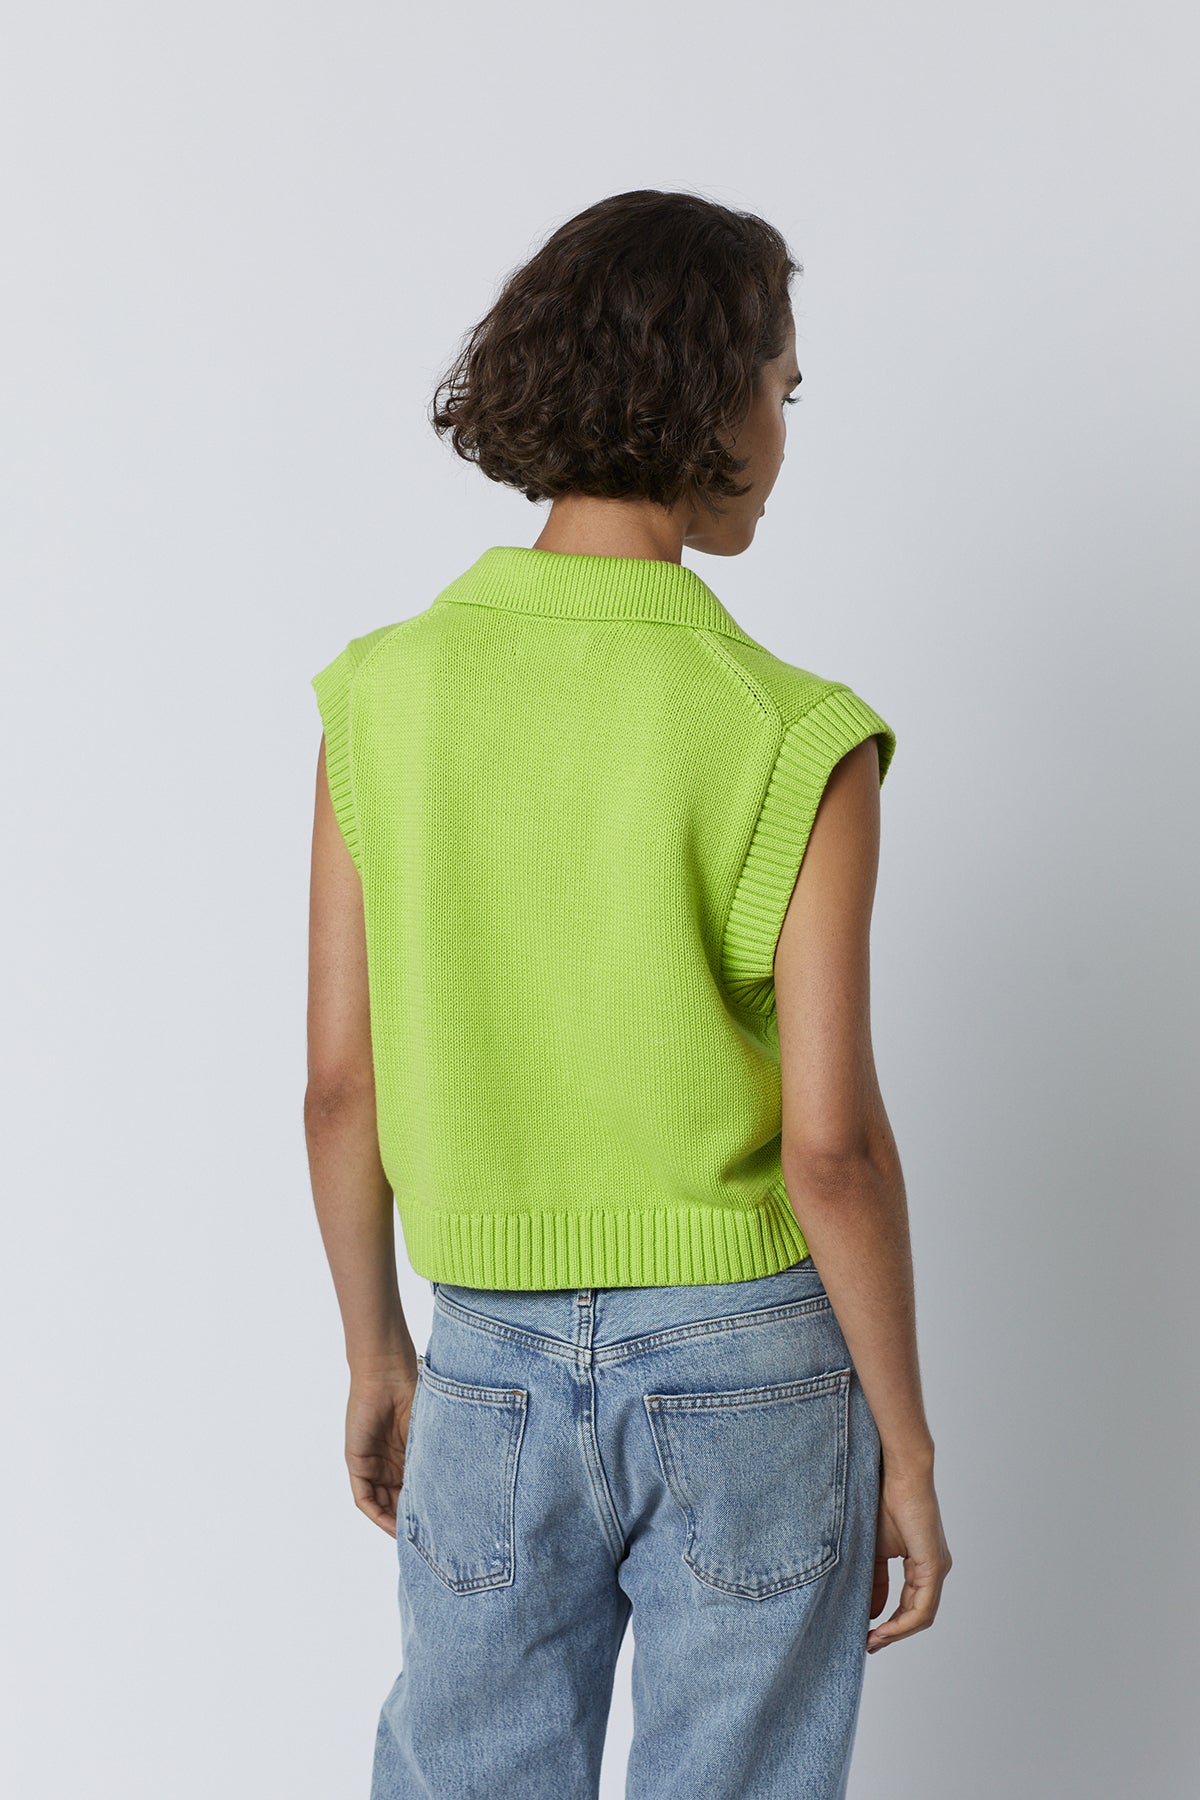 Avalon Sweater Tank in acid neon lime color with blue denim back-26002773344449